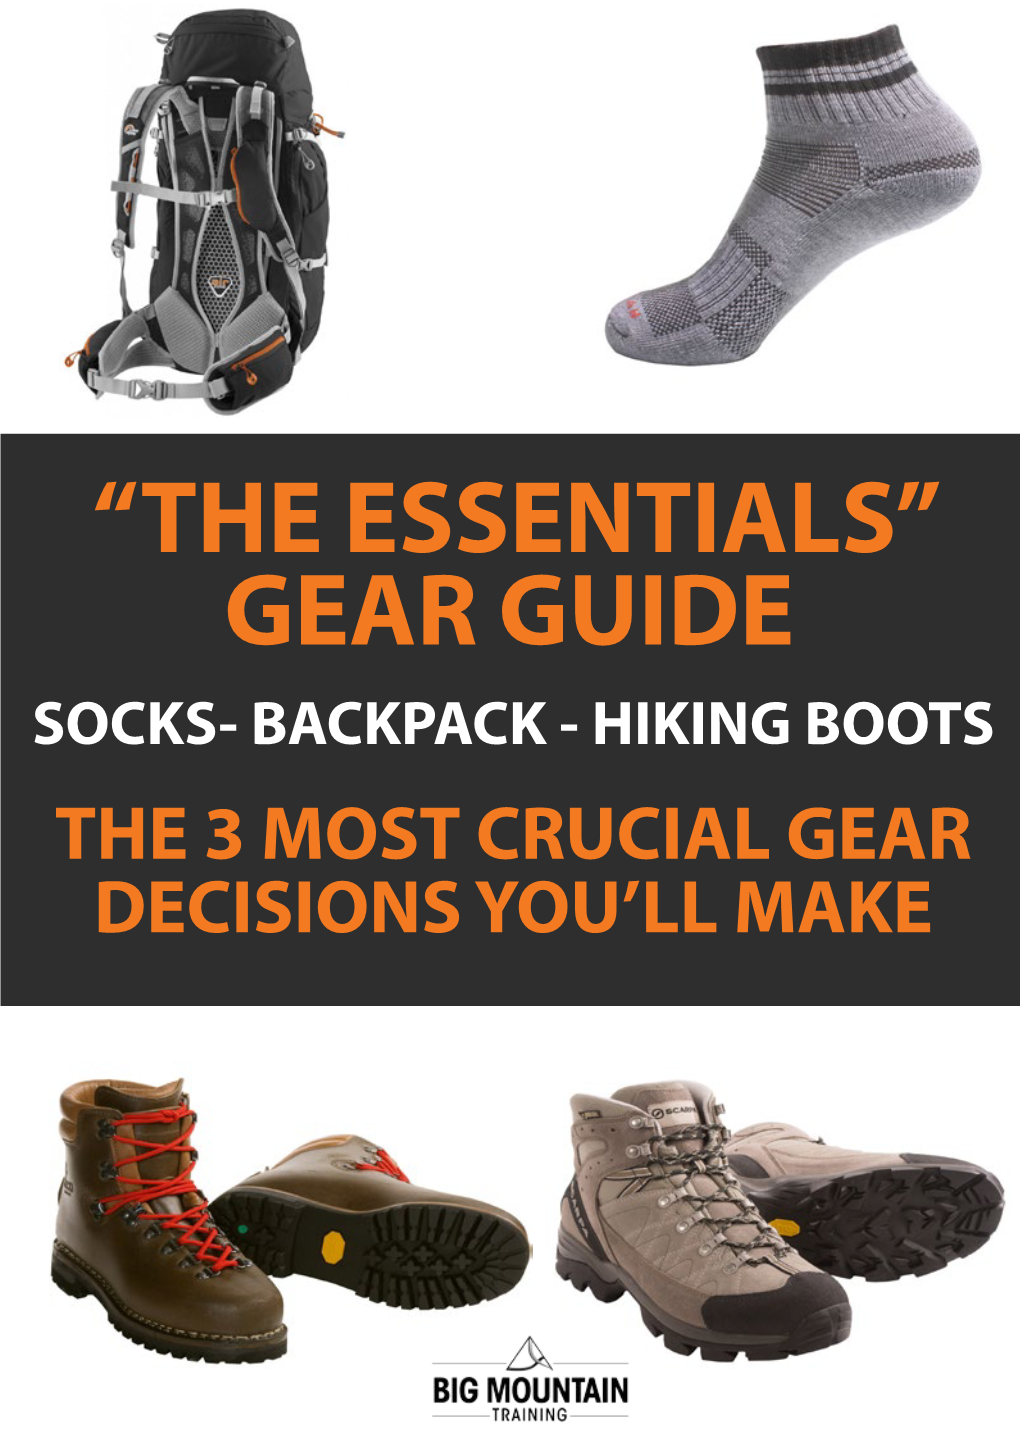 Gear Guide “The Essentials”